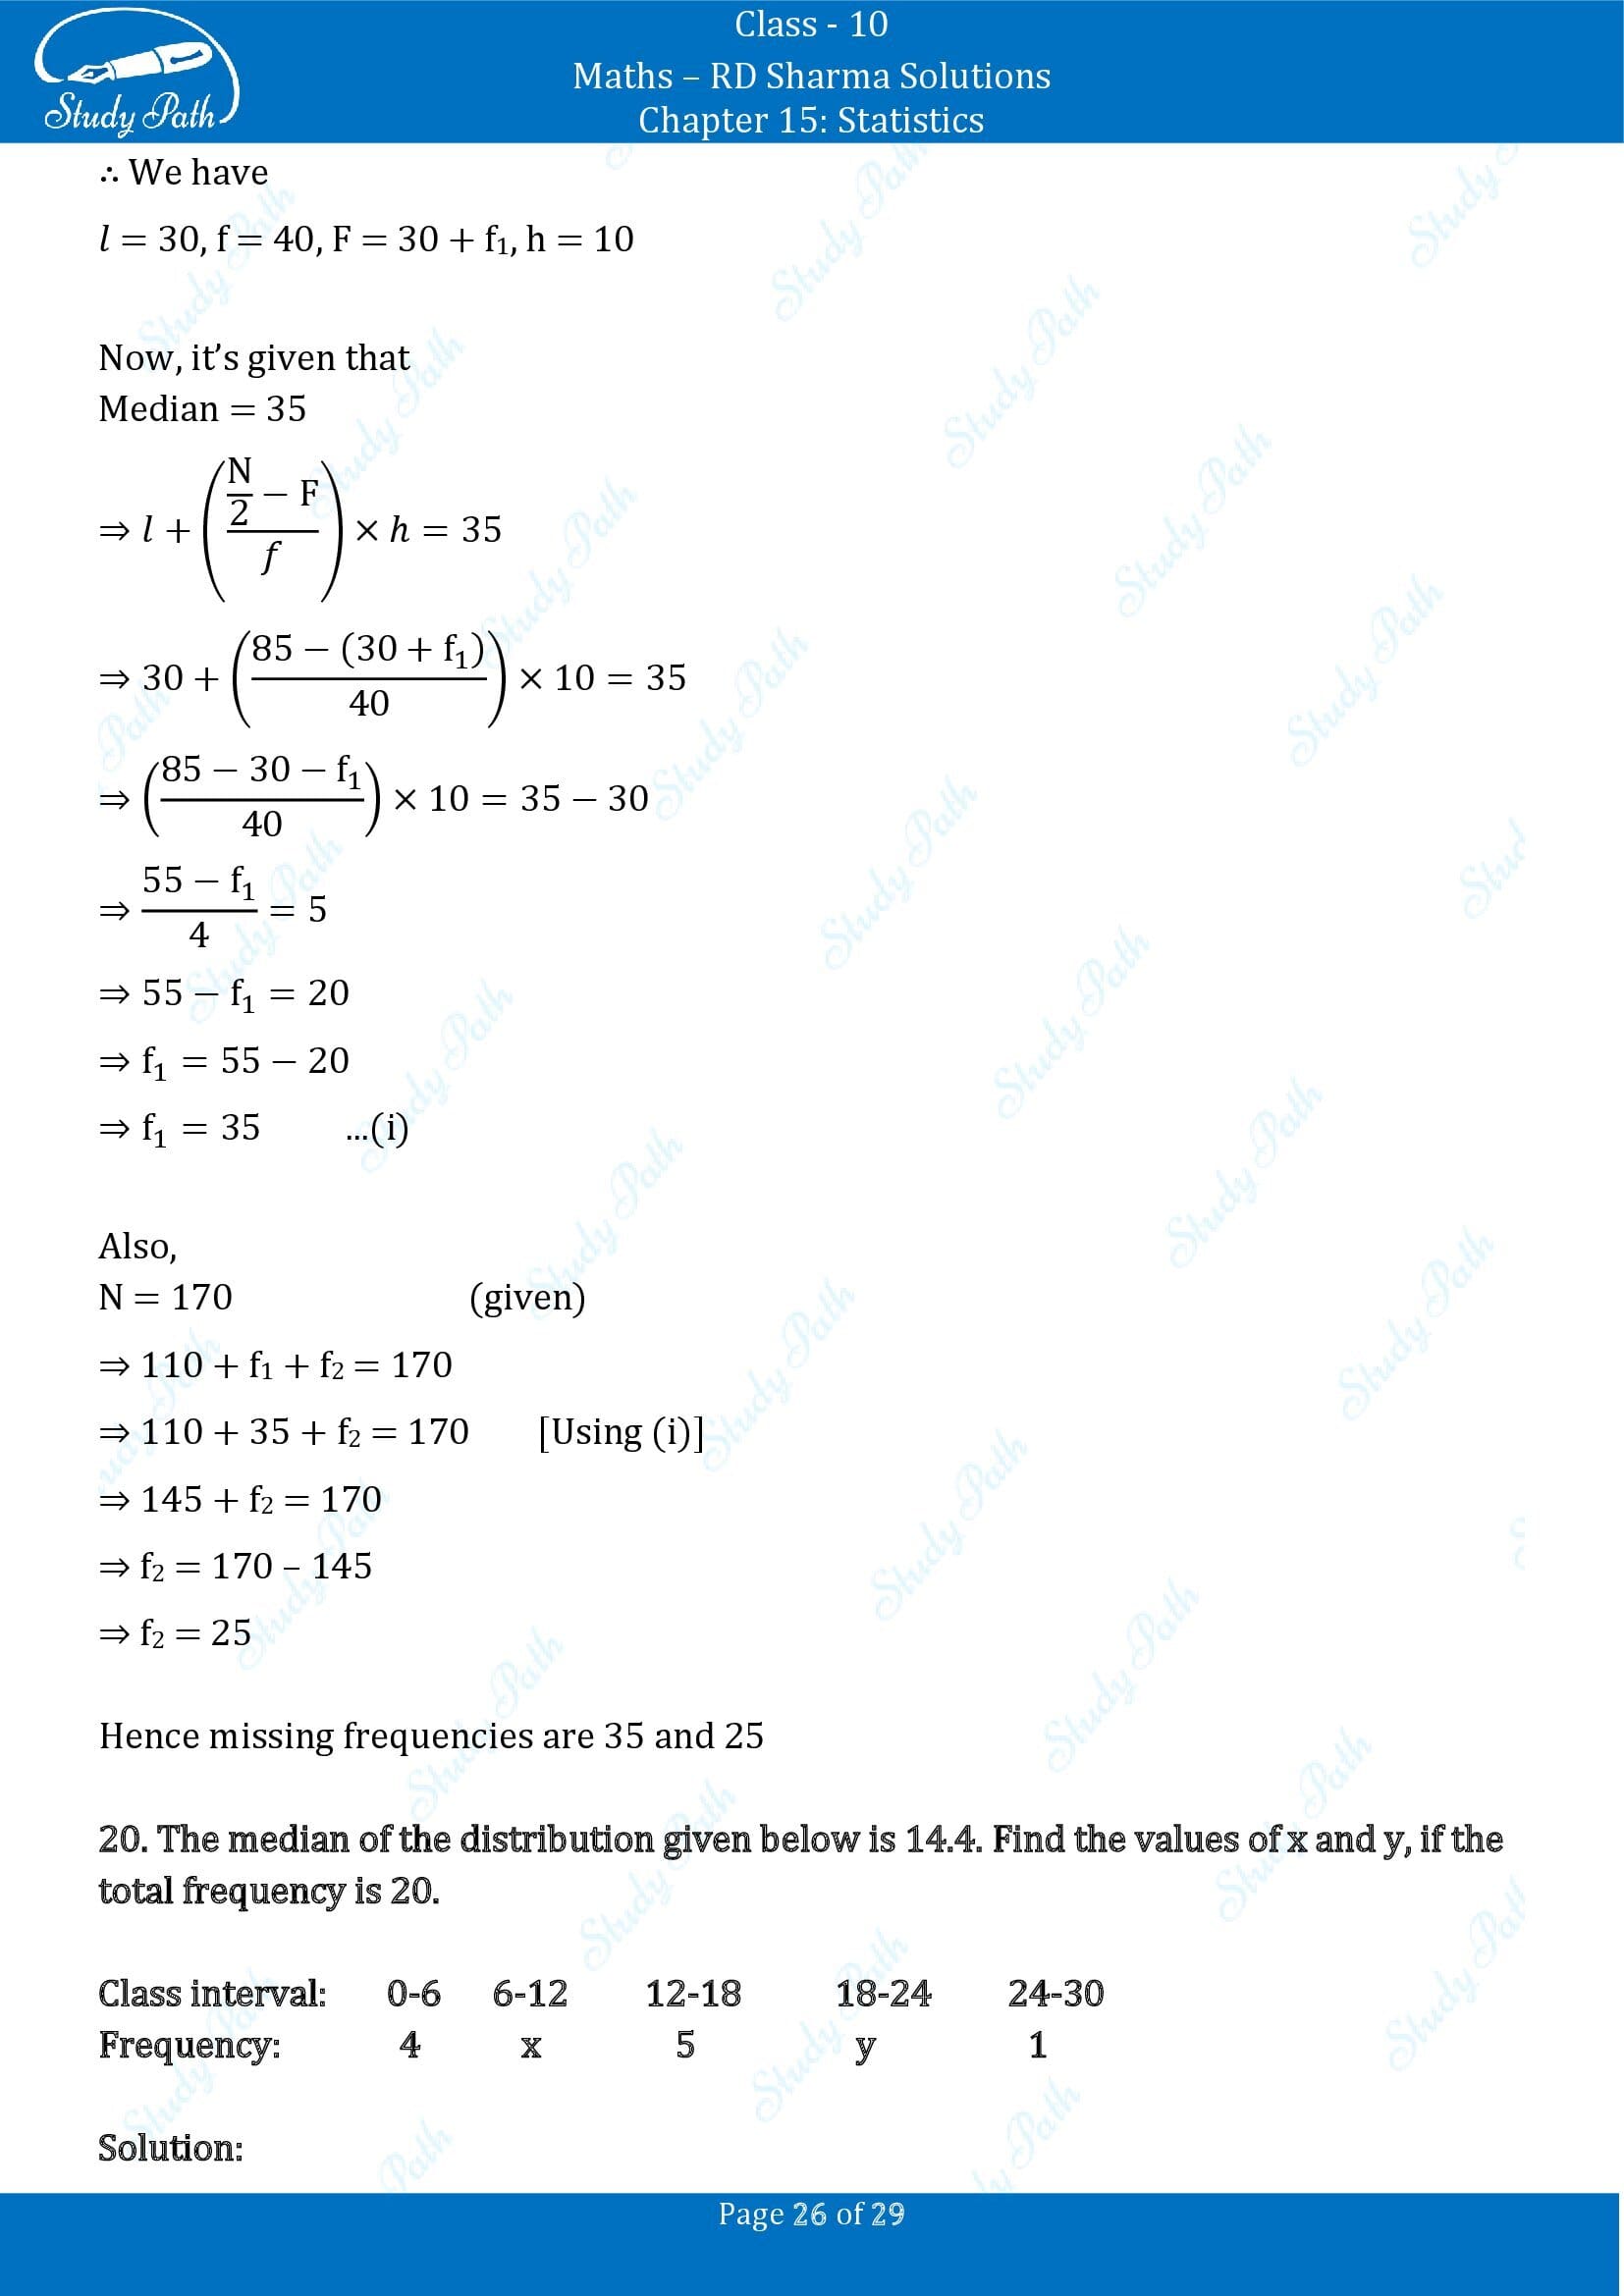 RD Sharma Solutions Class 10 Chapter 15 Statistics Exercise 15.4 00026